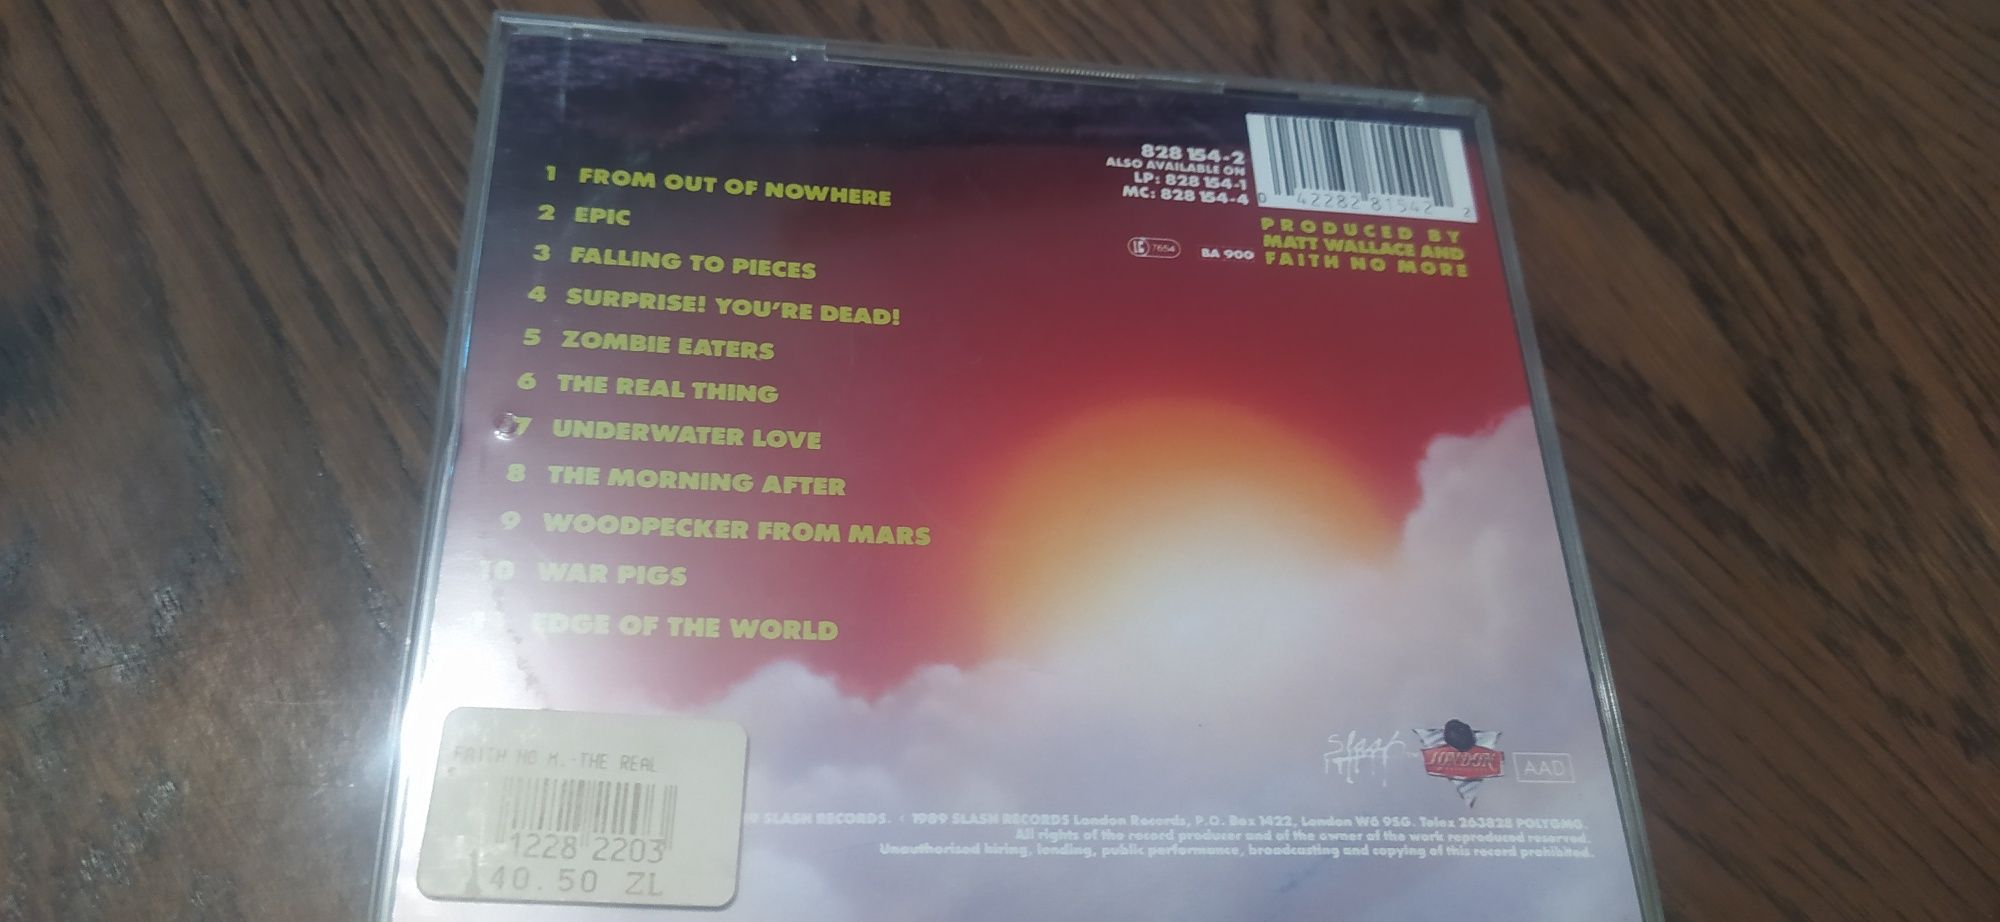 Faith More The Real Thing cd